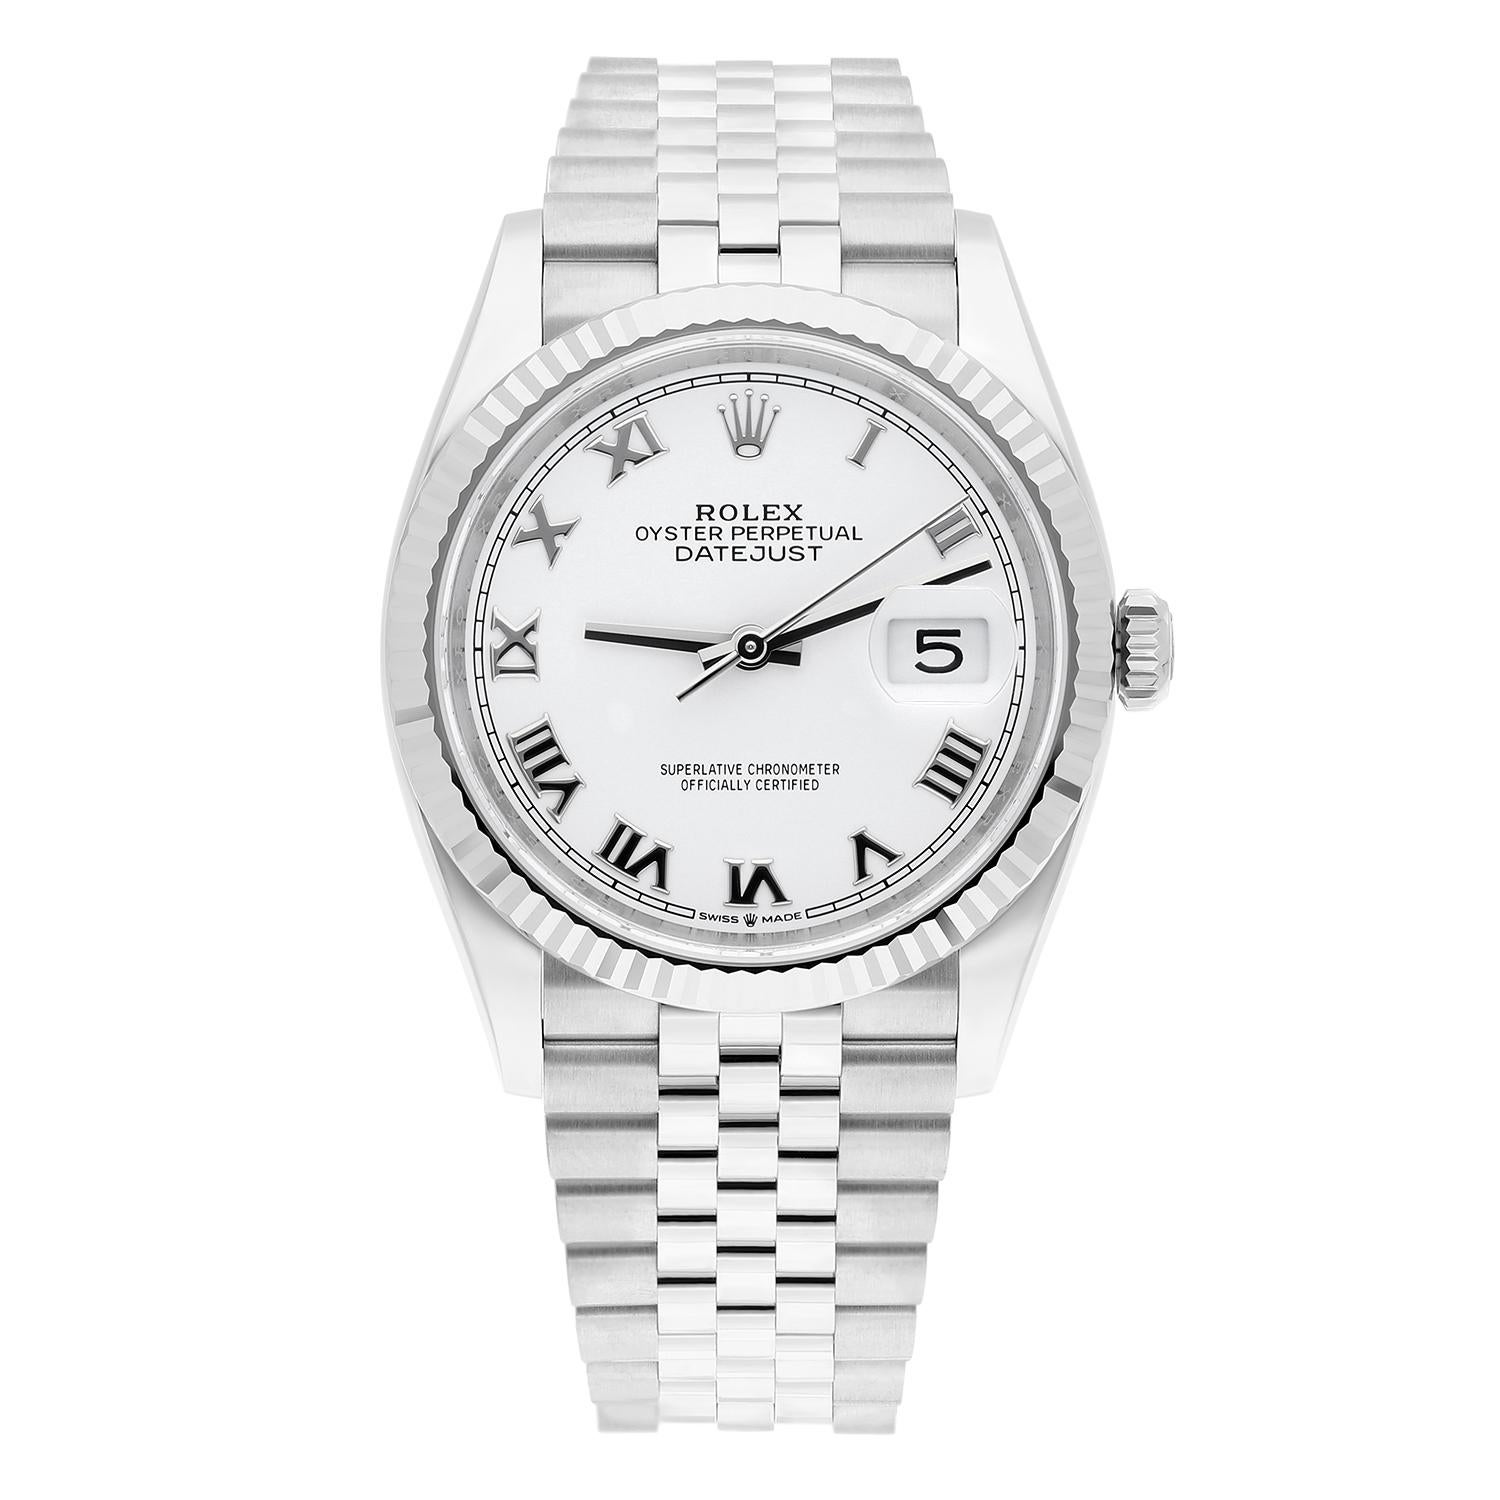 This Rolex Datejust wristwatch is a luxury timepiece with a round, 36mm stainless steel case and a white dial featuring Roman numerals. The watch has a fluted, fixed 18K white gold bezel and is water-resistant up to 100 meters. The scratch-resistant